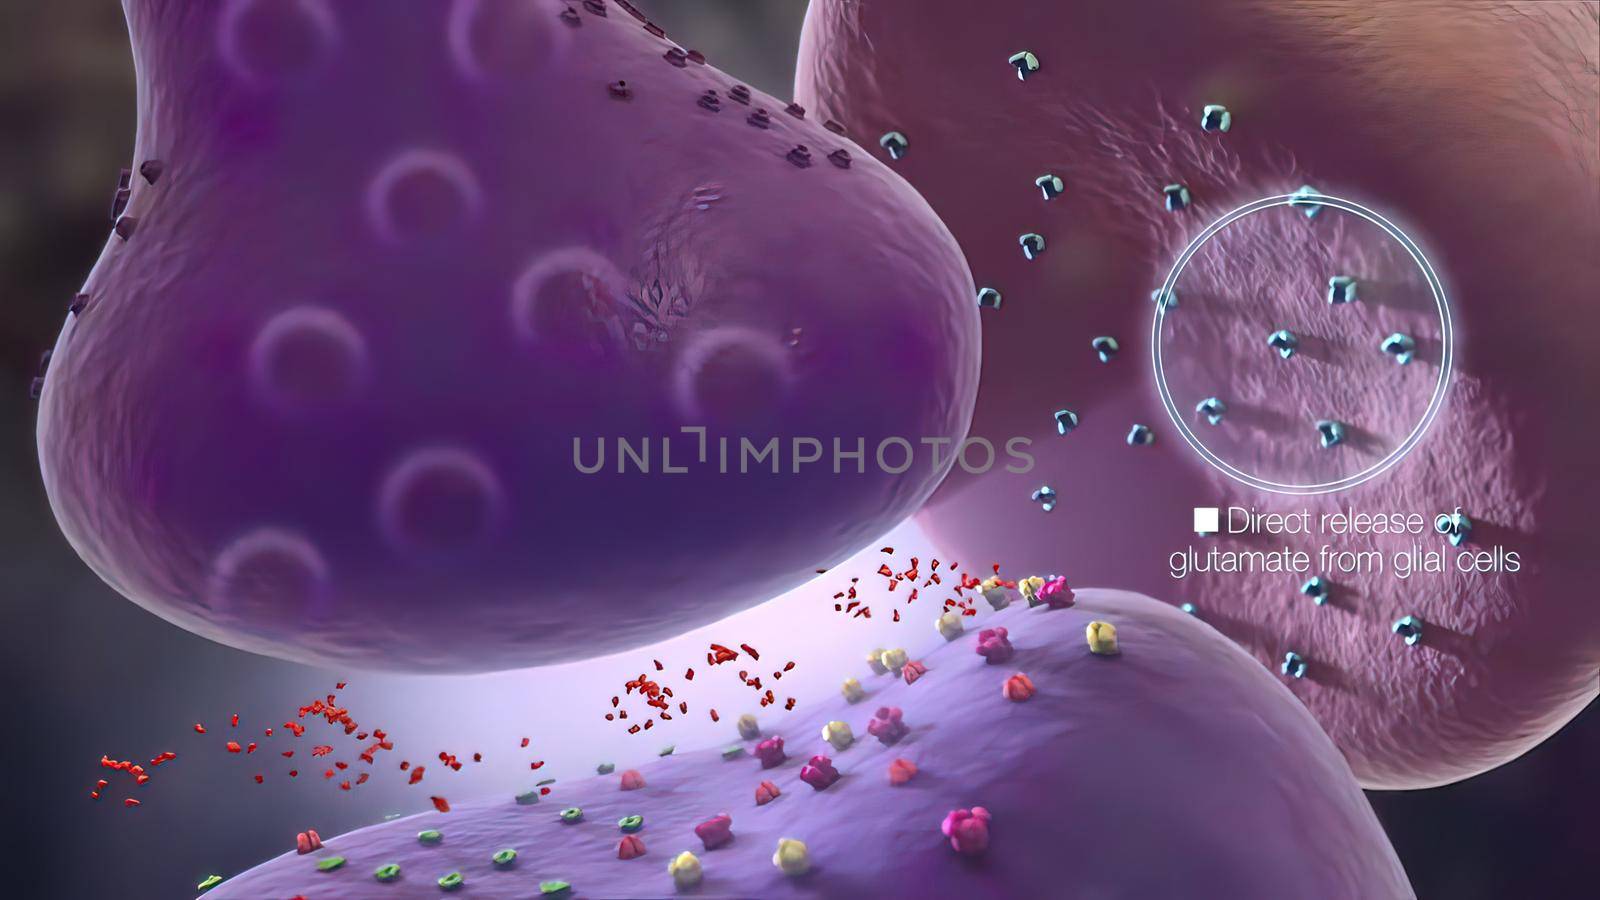 Glial cells of the nervous system release transmitters to release neuronal and synaptic activities.. 3D illustration